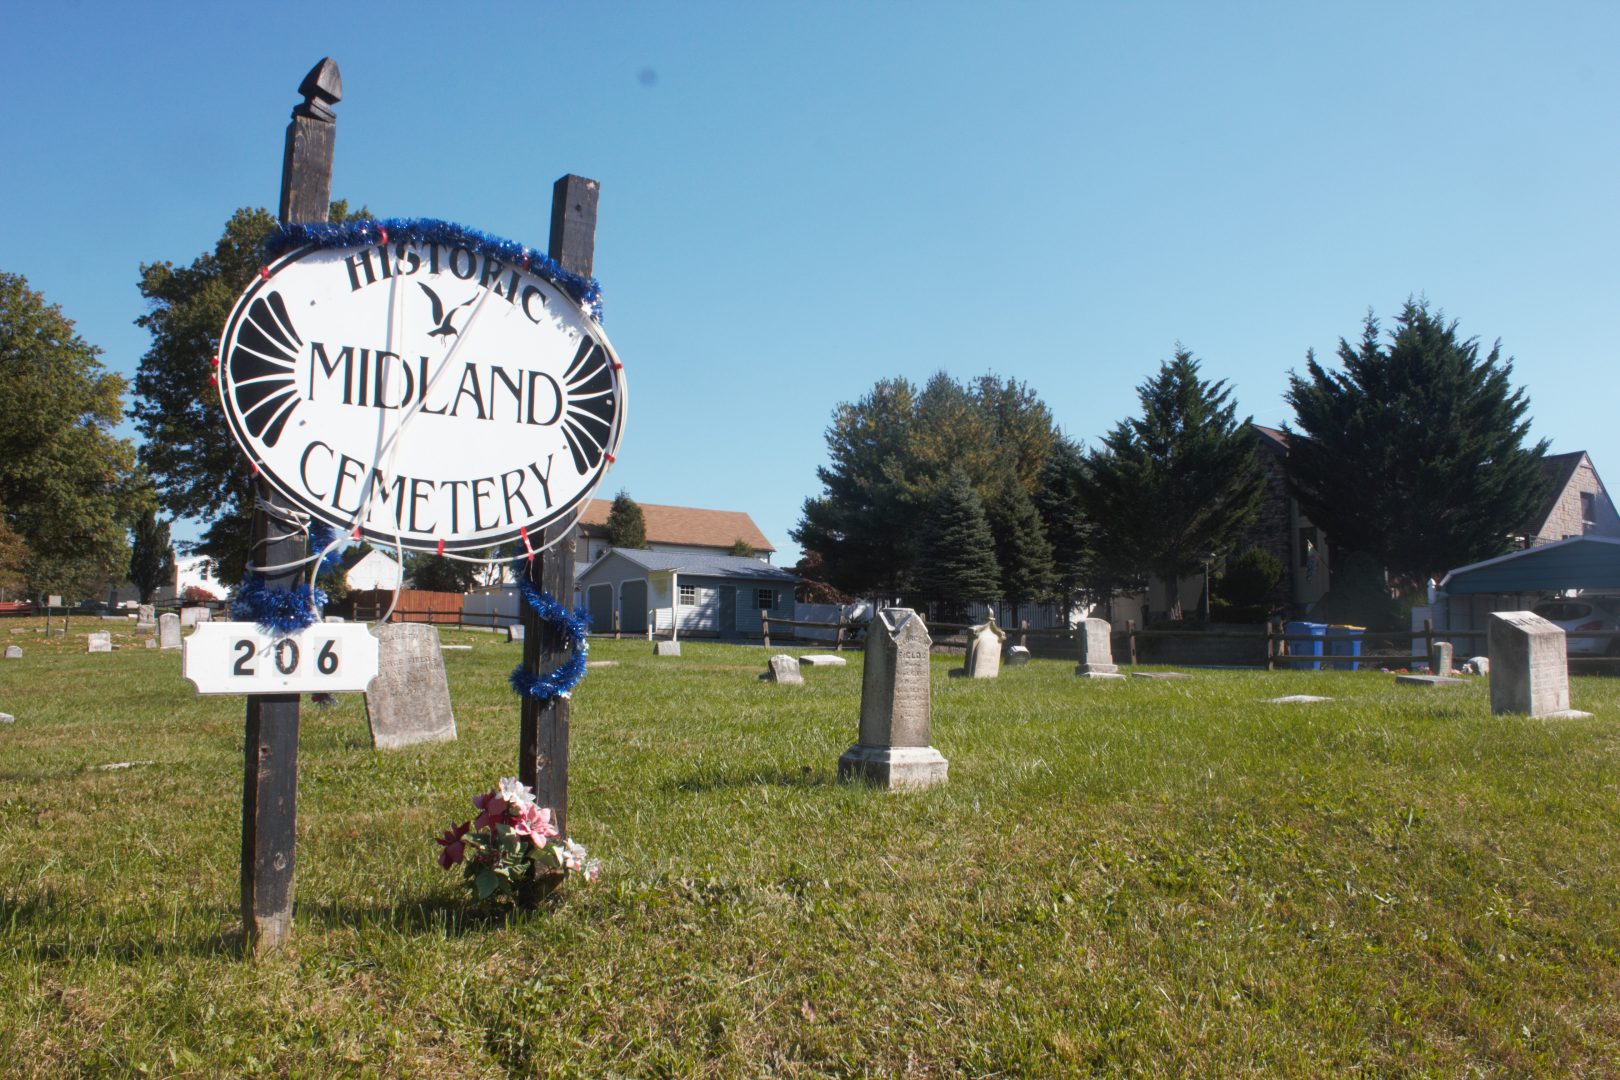 Midland Cemetery, located in Swatara Township, is the resting place of former enslaved people, Black Civil War soldiers, Buffalo Soldiers and other prominent leaders of central Pennsylvania's African American community.